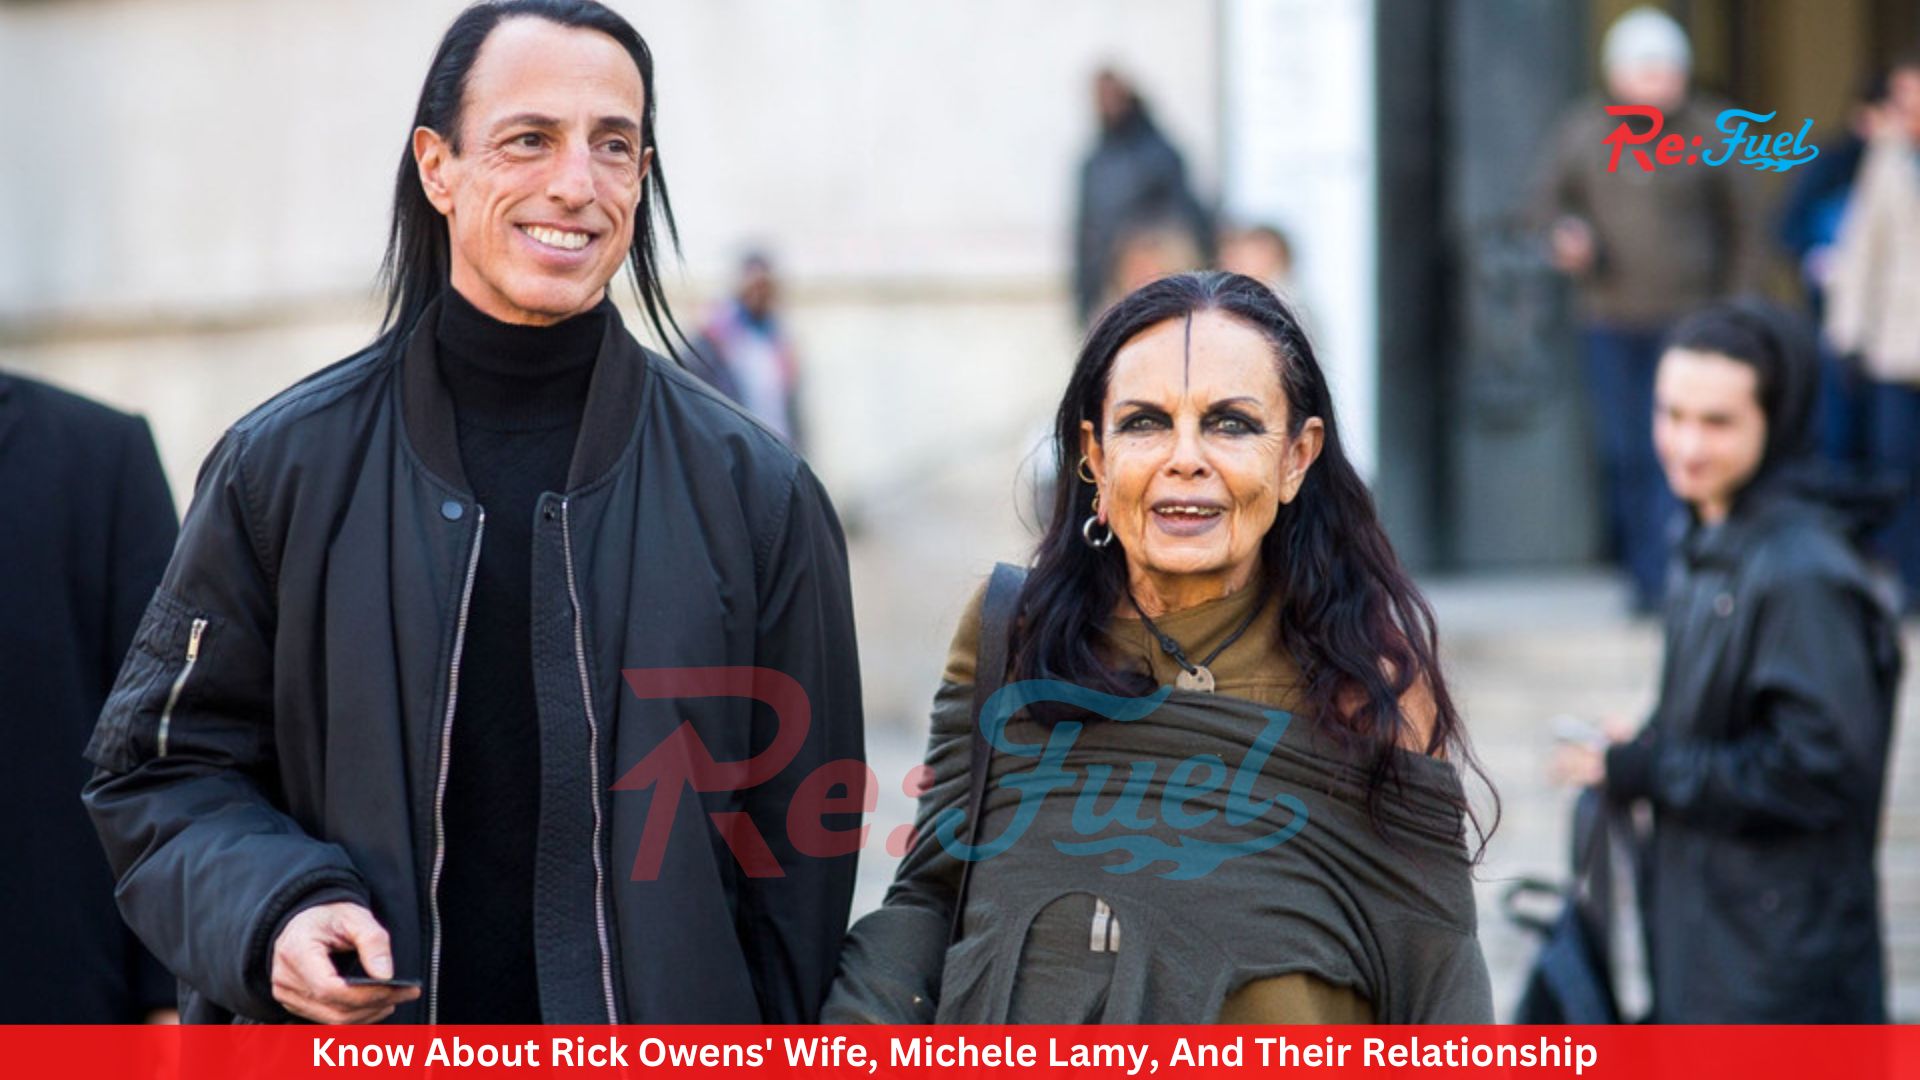 Know About Rick Owens' Wife, Michele Lamy, And Their Relationship